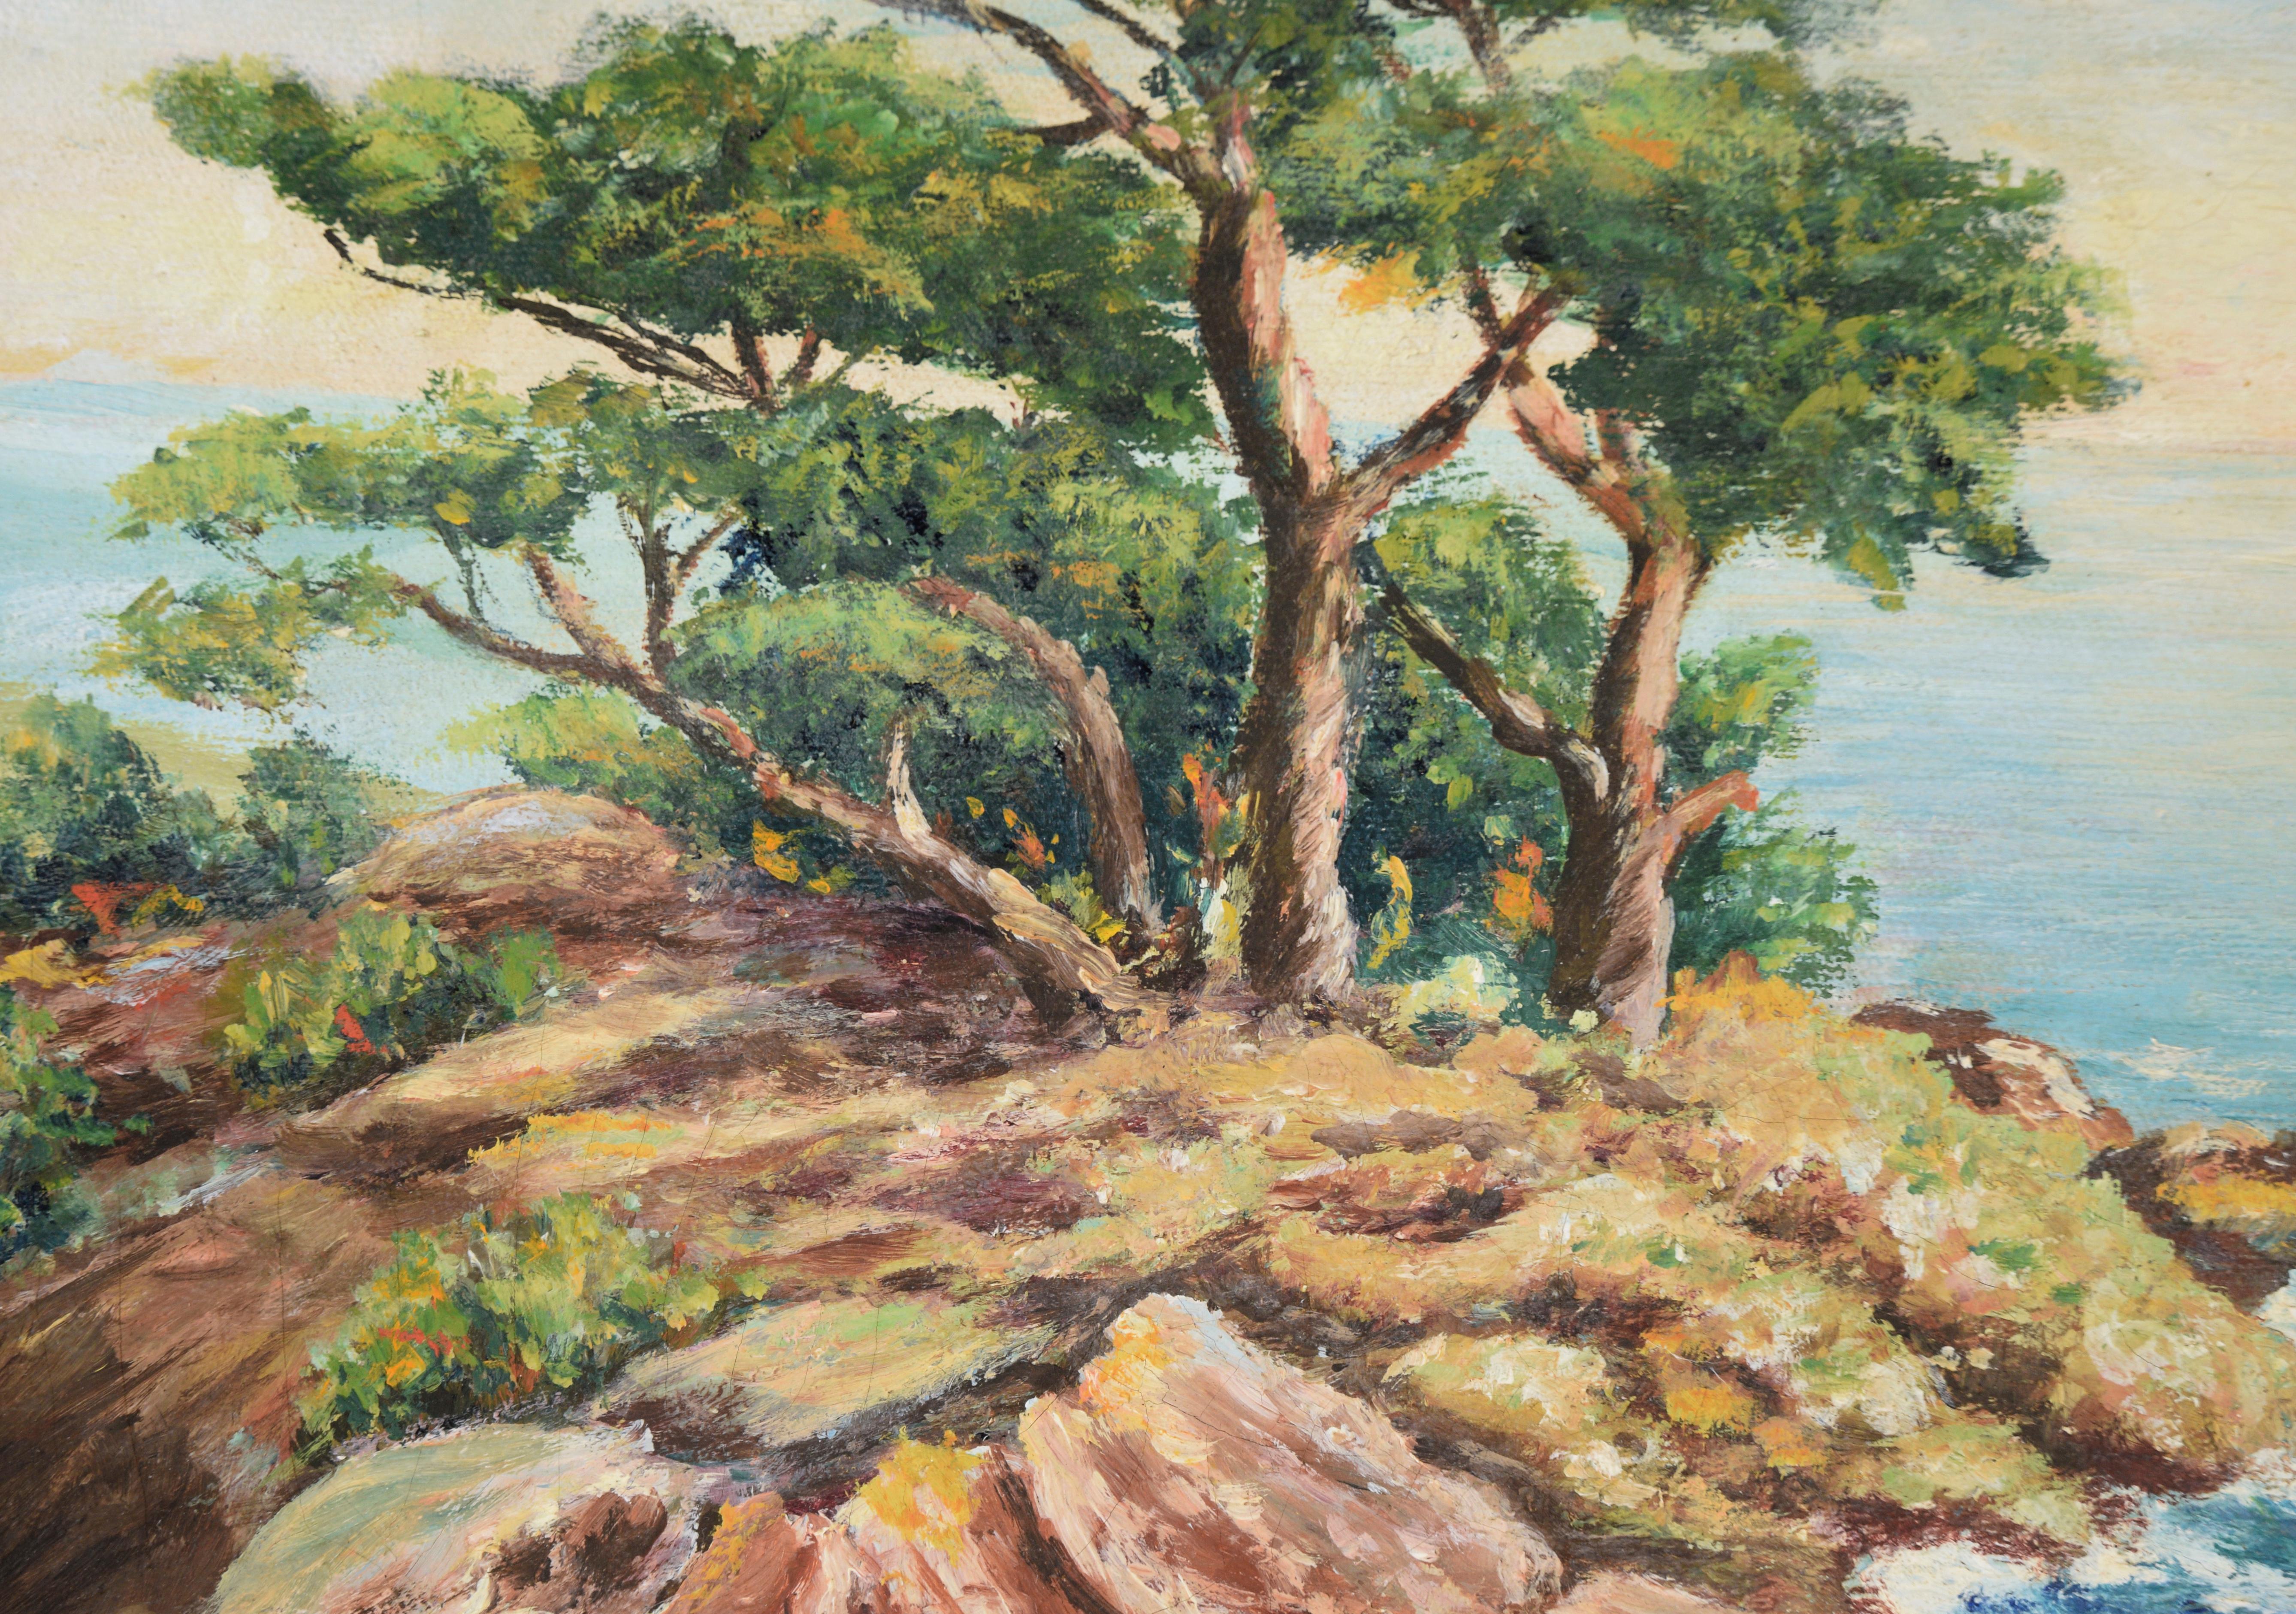 Monterey Cypress - Carmel by the Sea California Seascape in Oil on Canvas - American Impressionist Painting by E Holton